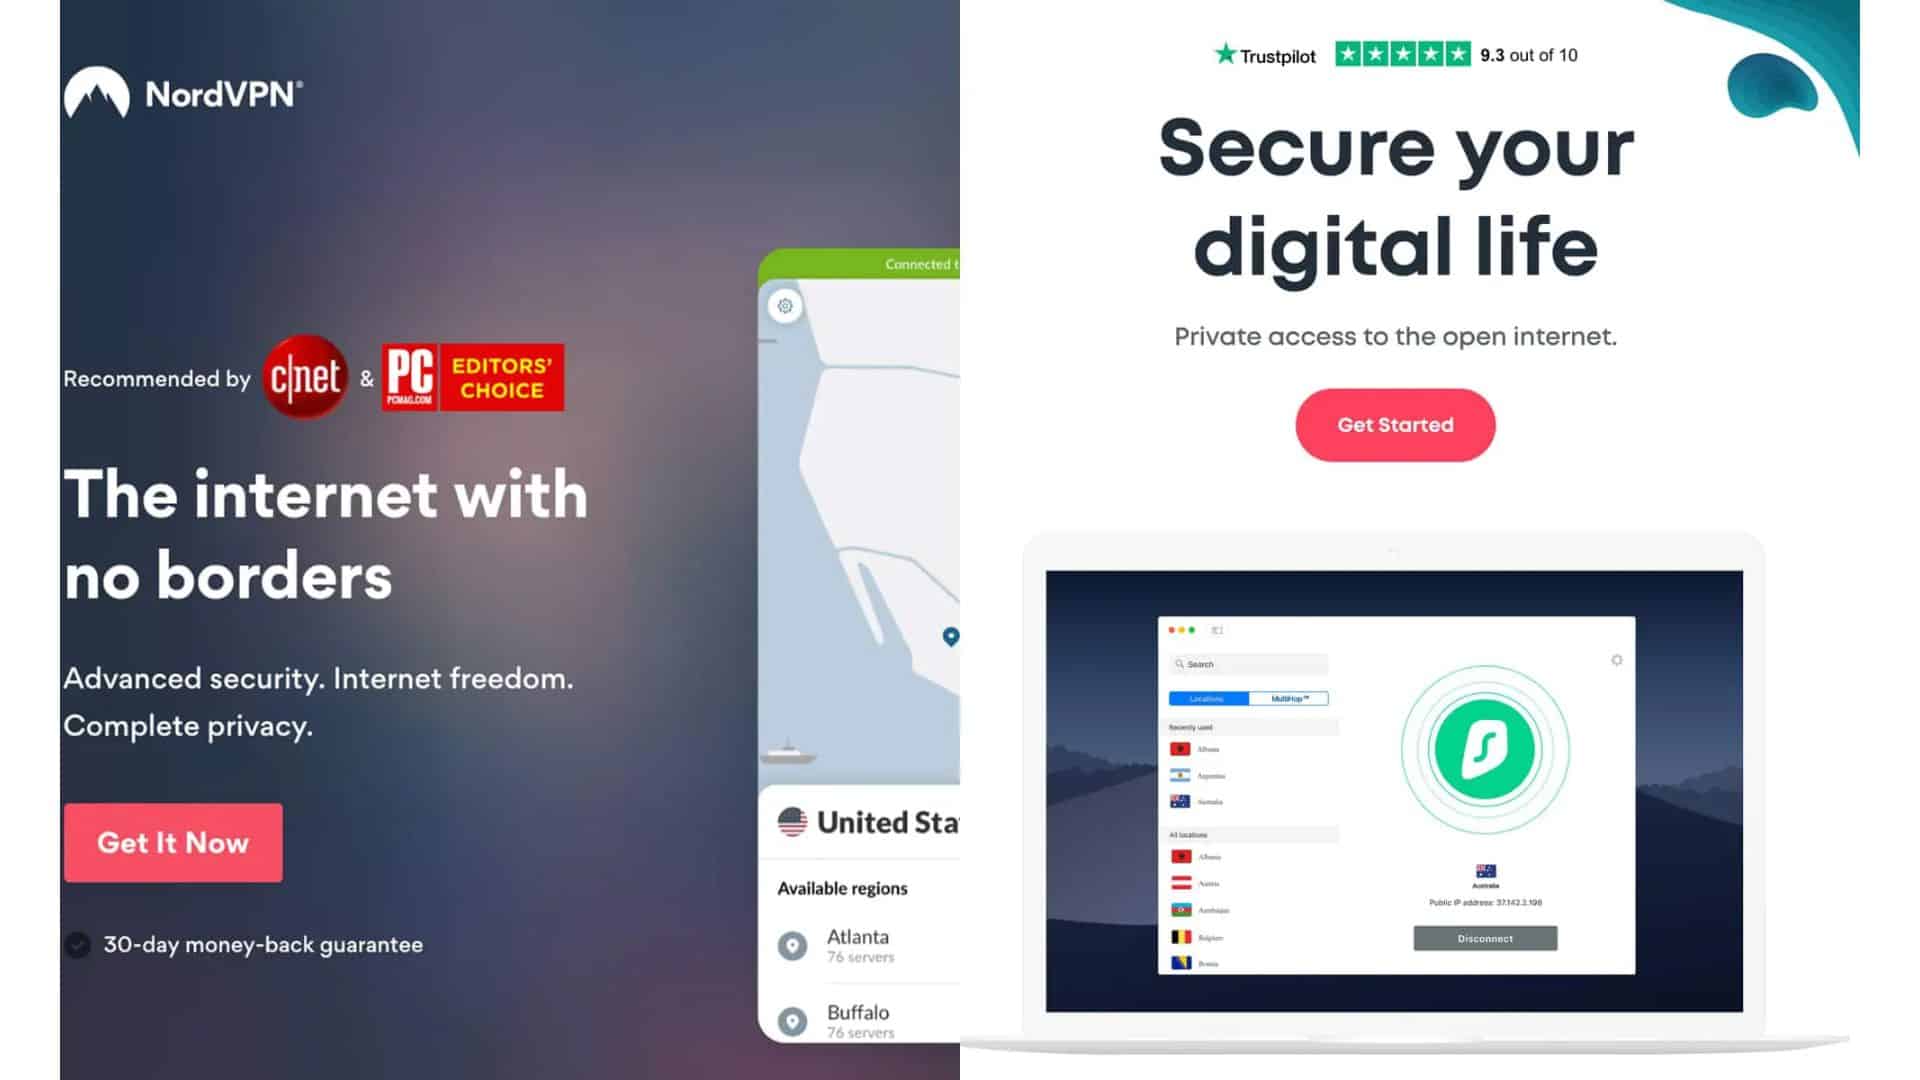 Compare Surfshark with NordVPN